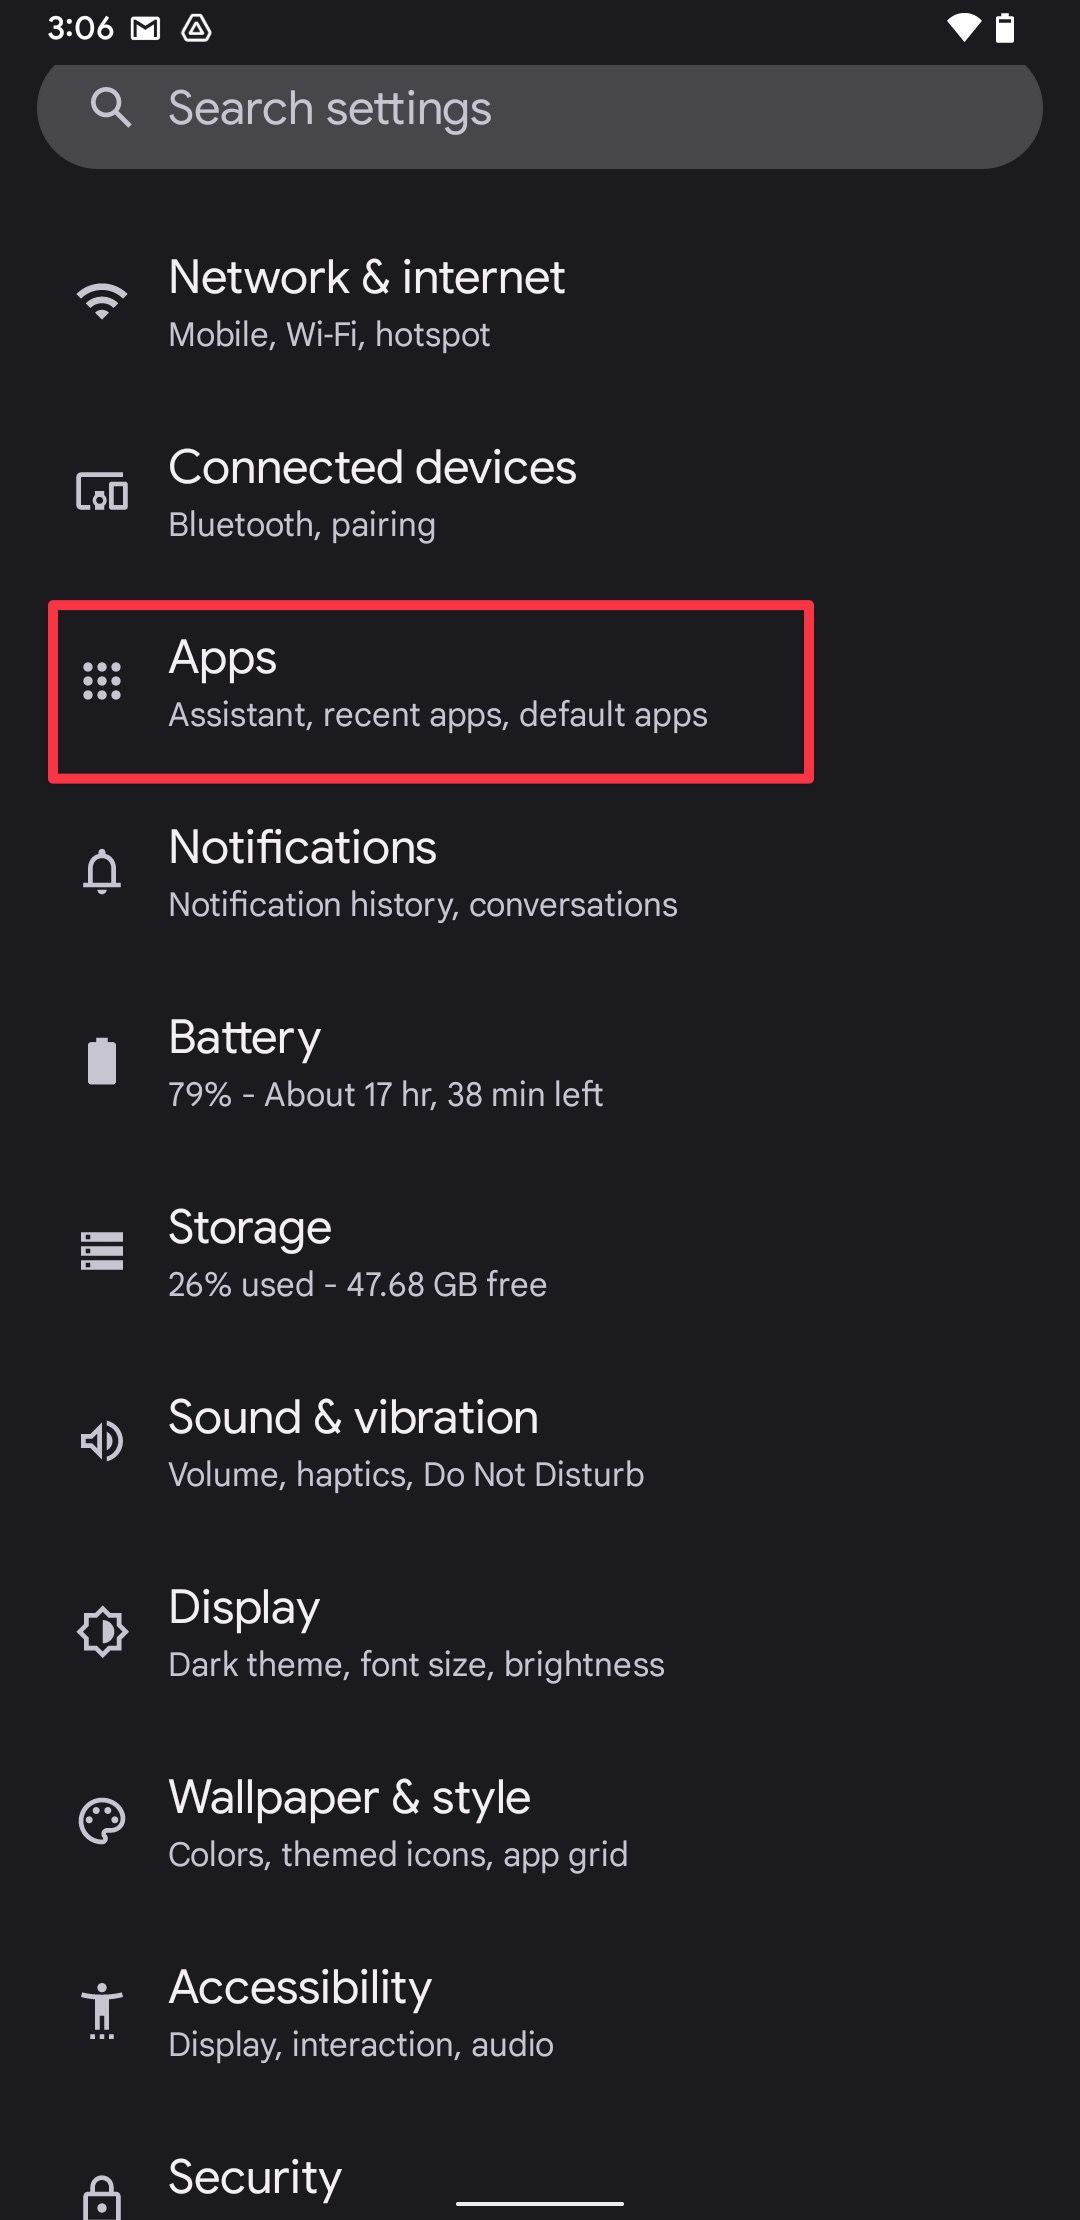 Android settings app screenshot showing Apps option